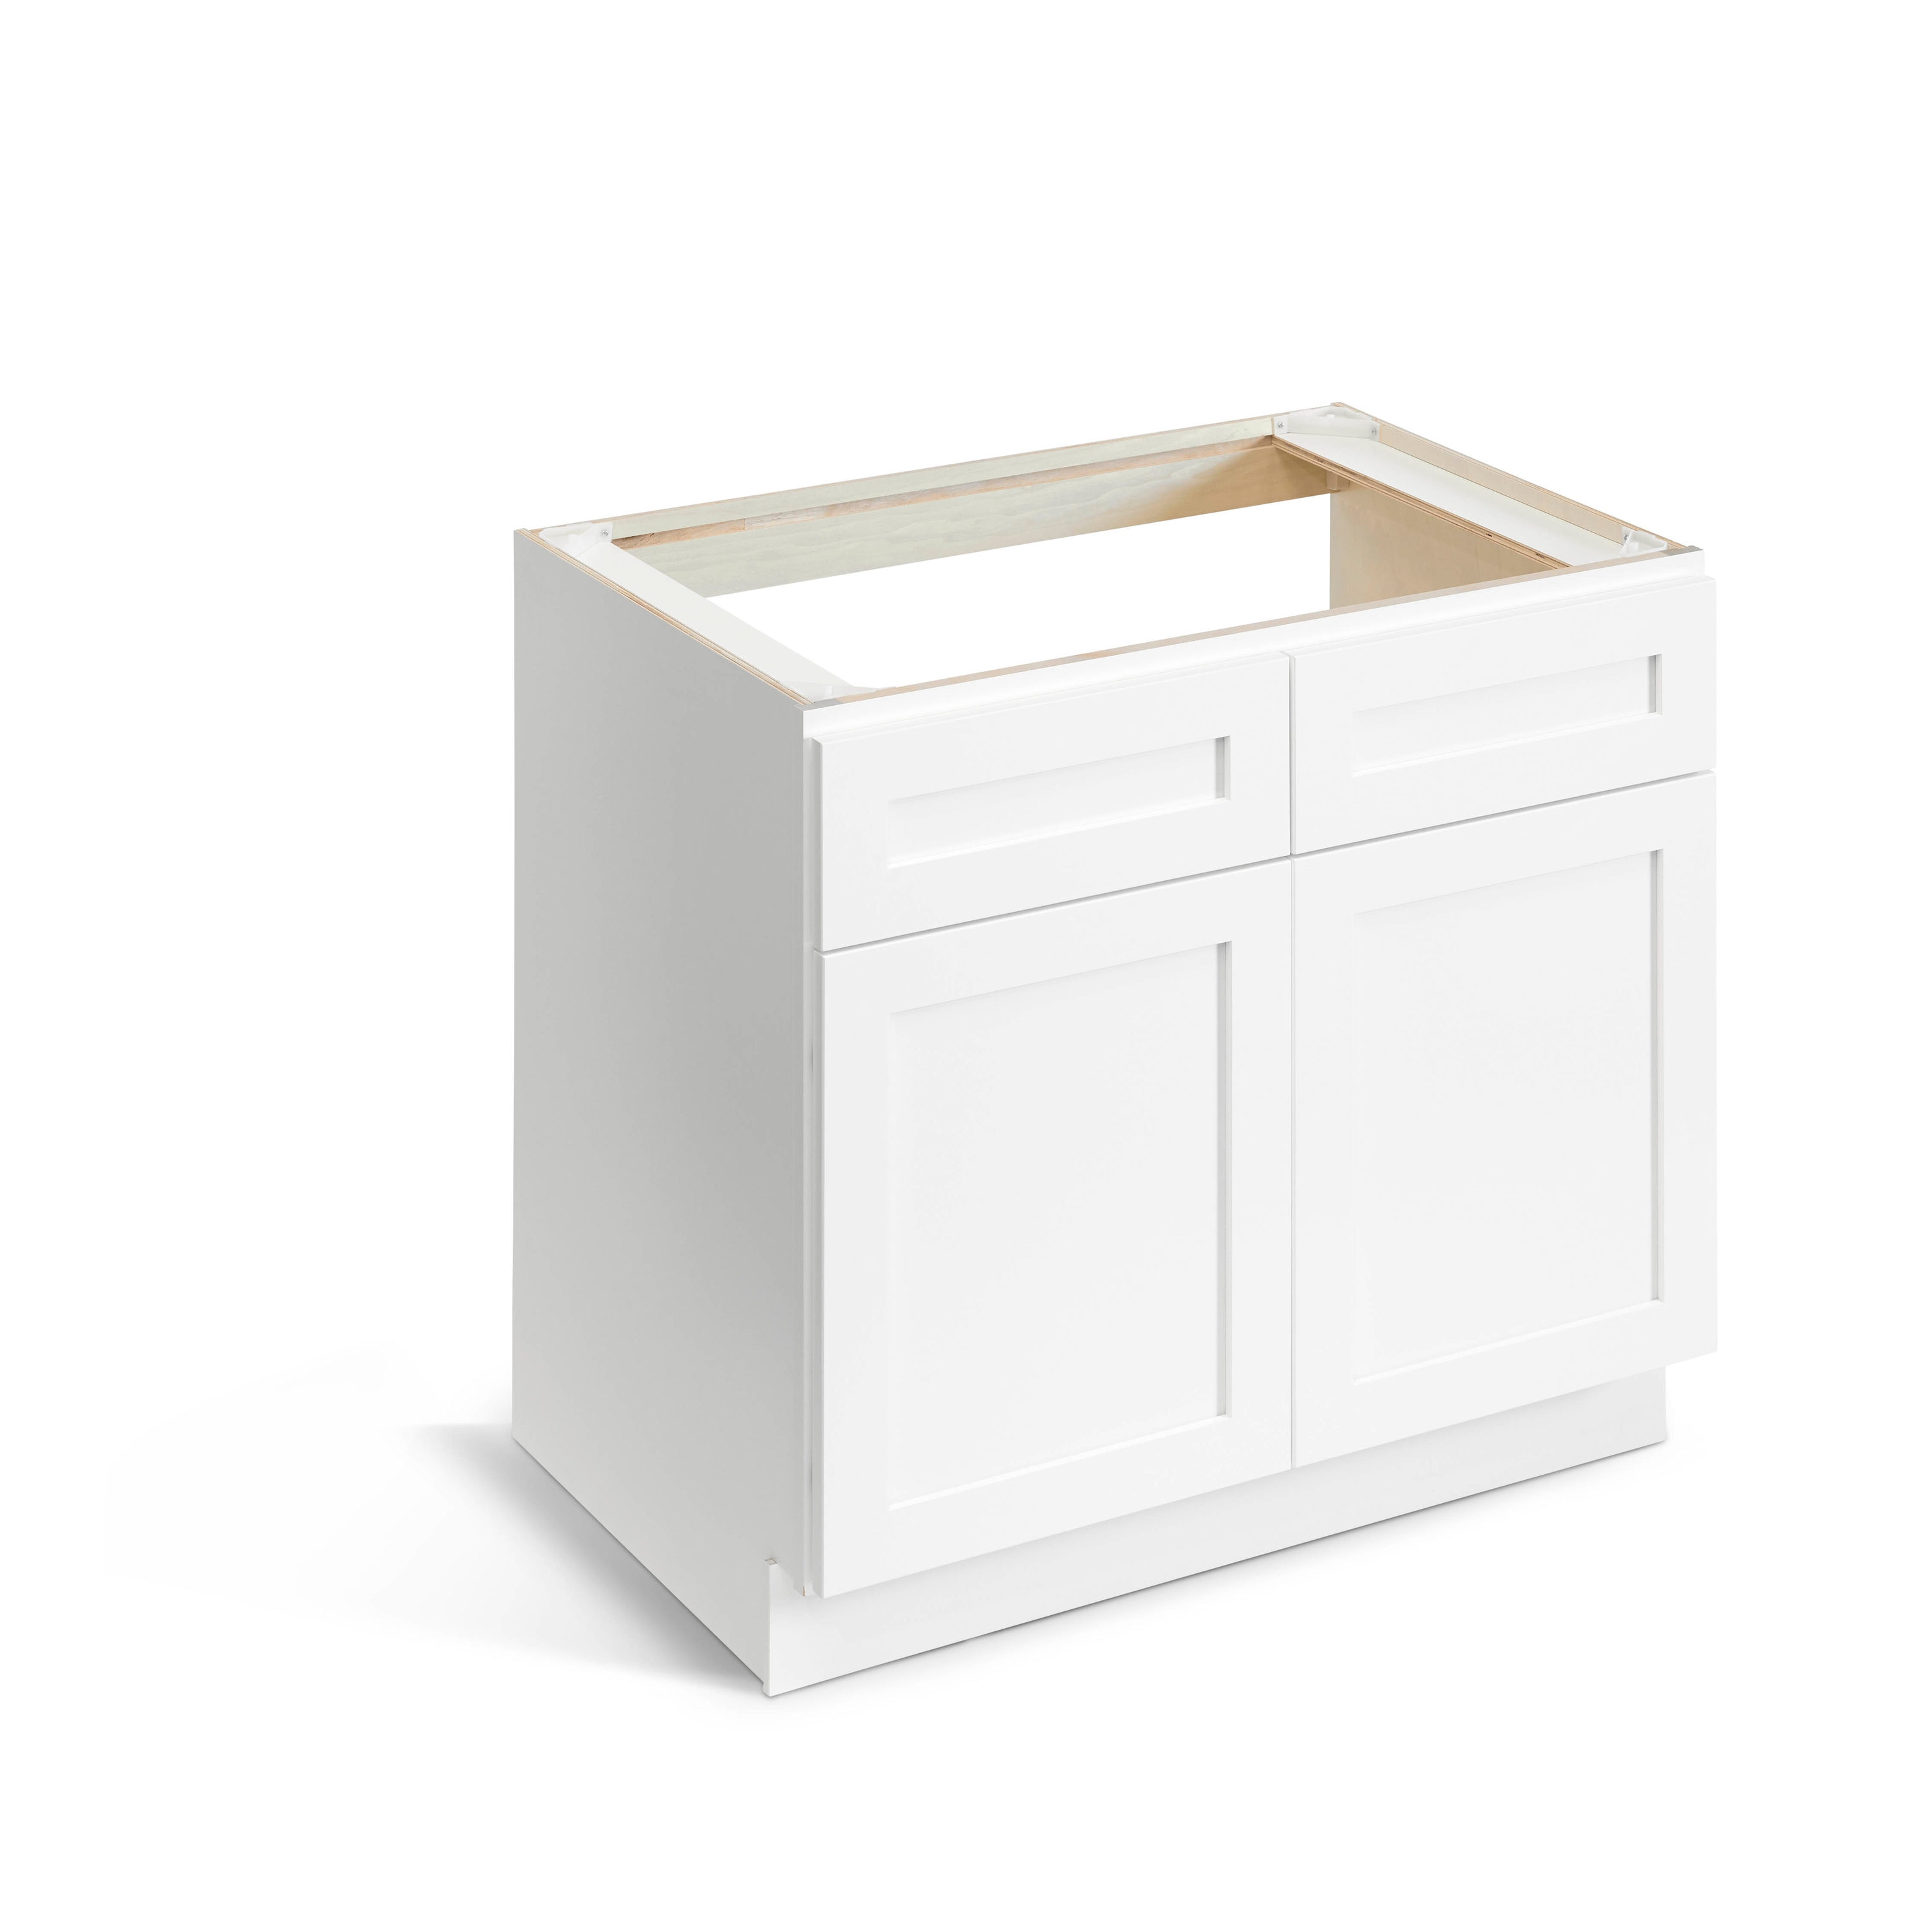 Surfaces 22.4375-in W x 0.75-in H x 10.5-in D Natural Birch Stained Cabinet  Shelf Kit